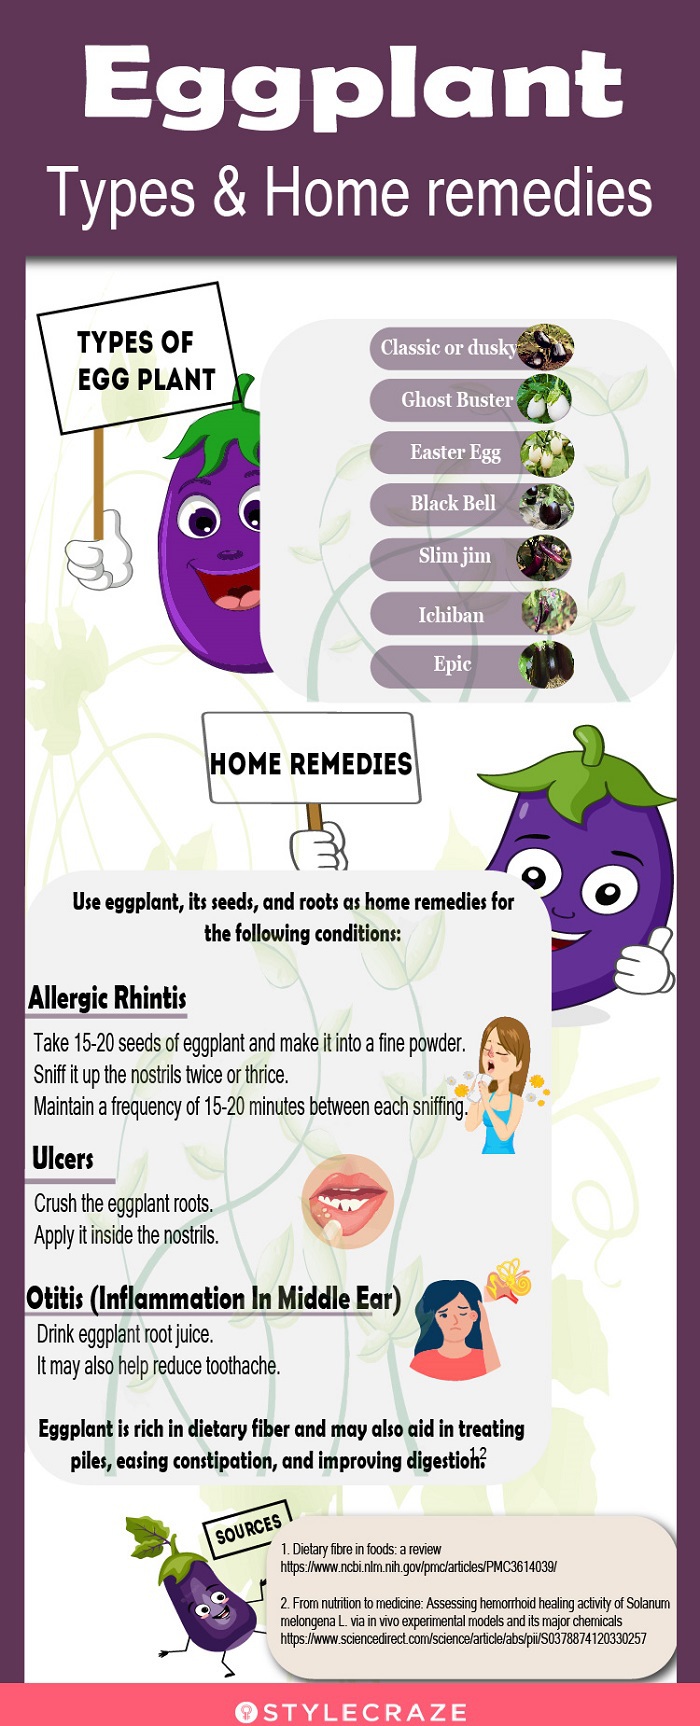 egg plant types and home remedies [infographic]